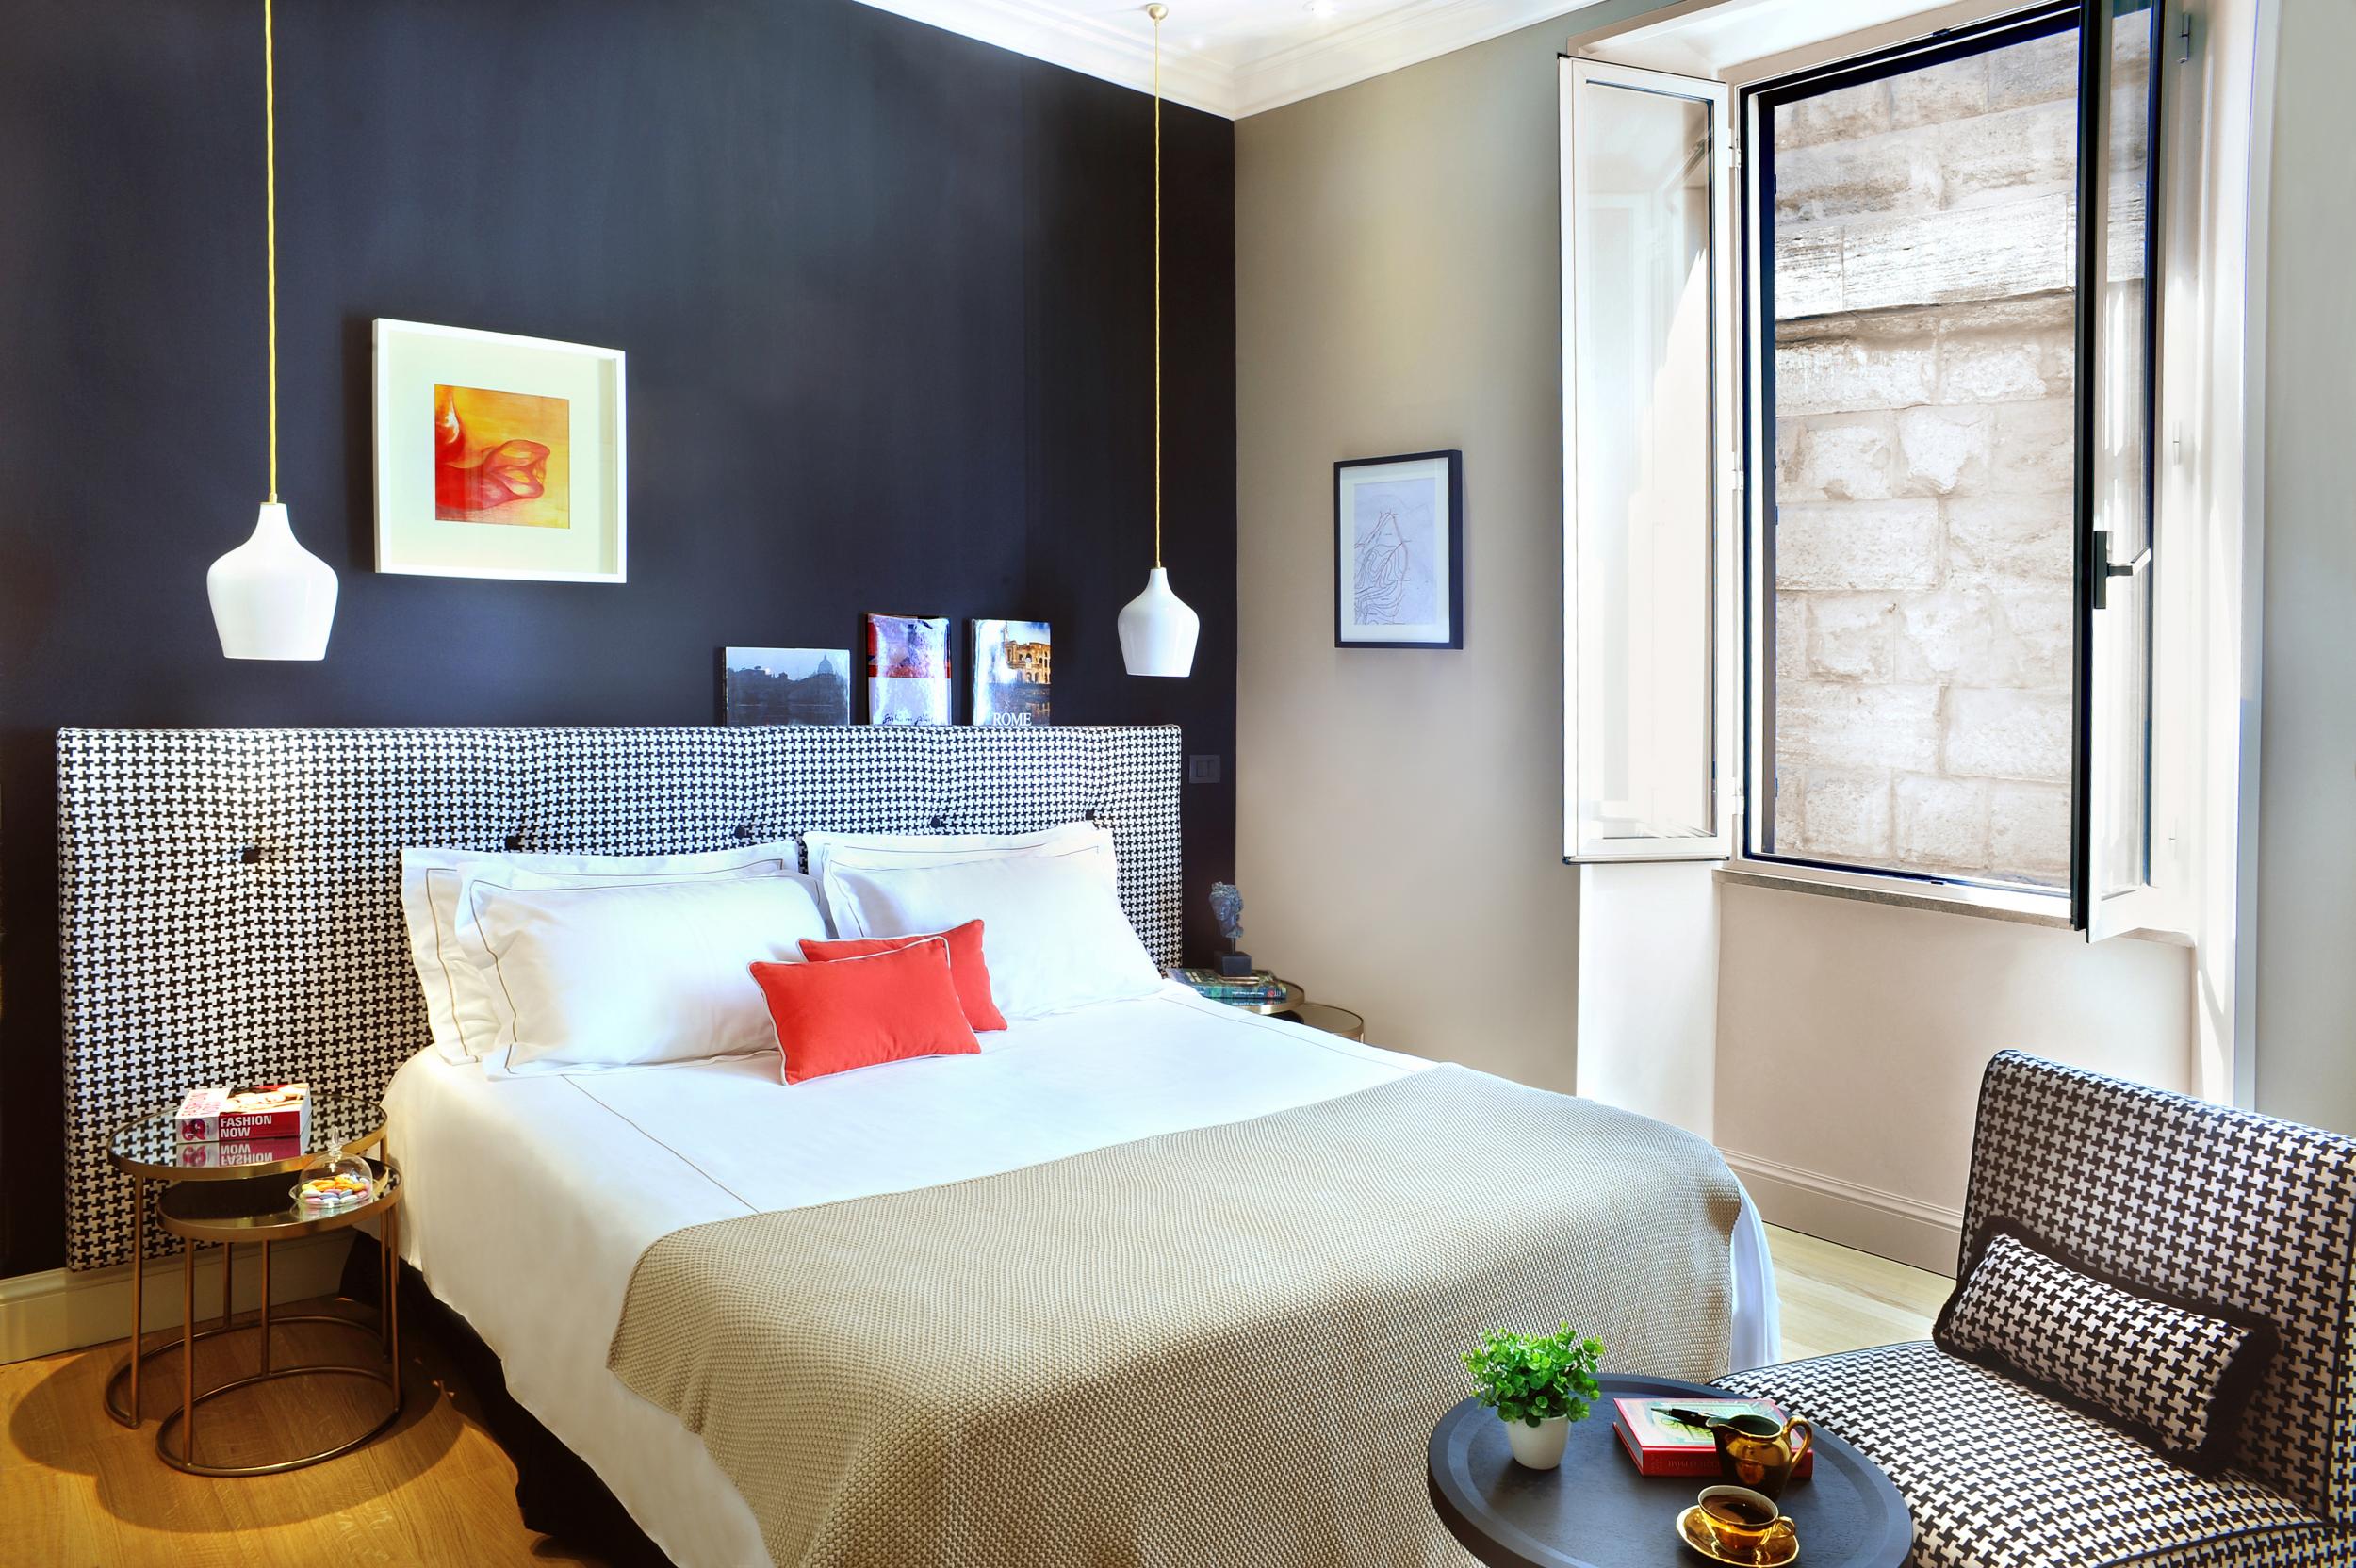 Nerva Boutique Hotel: chic interiors at a reasonable price point